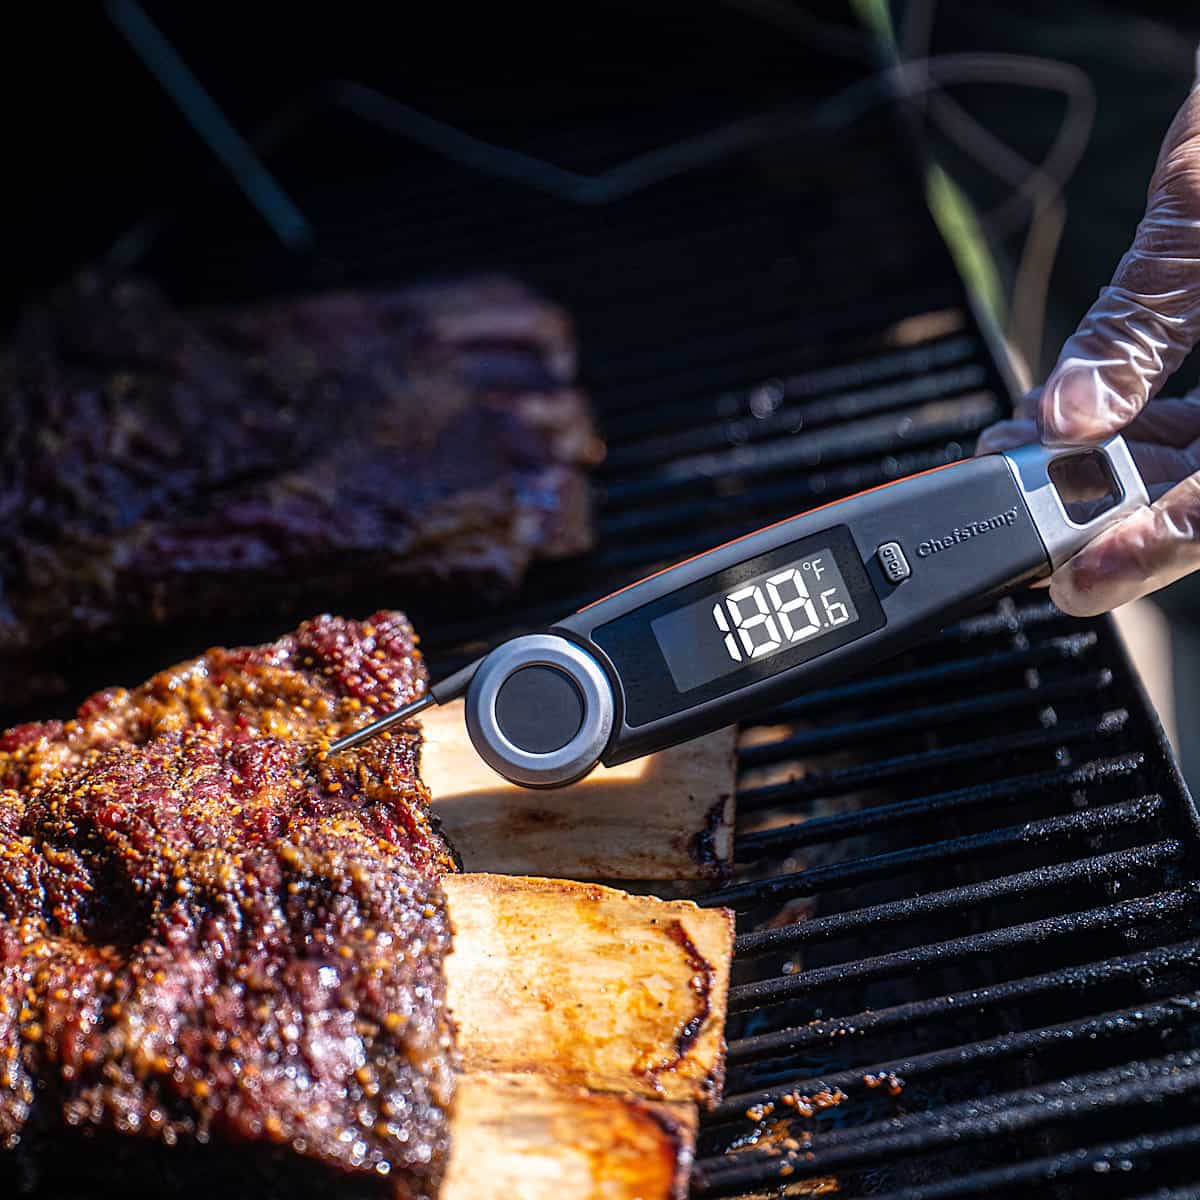 CHEFSTEMP Instant Read Meat Thermometer, 1-Second Meat Thermometer